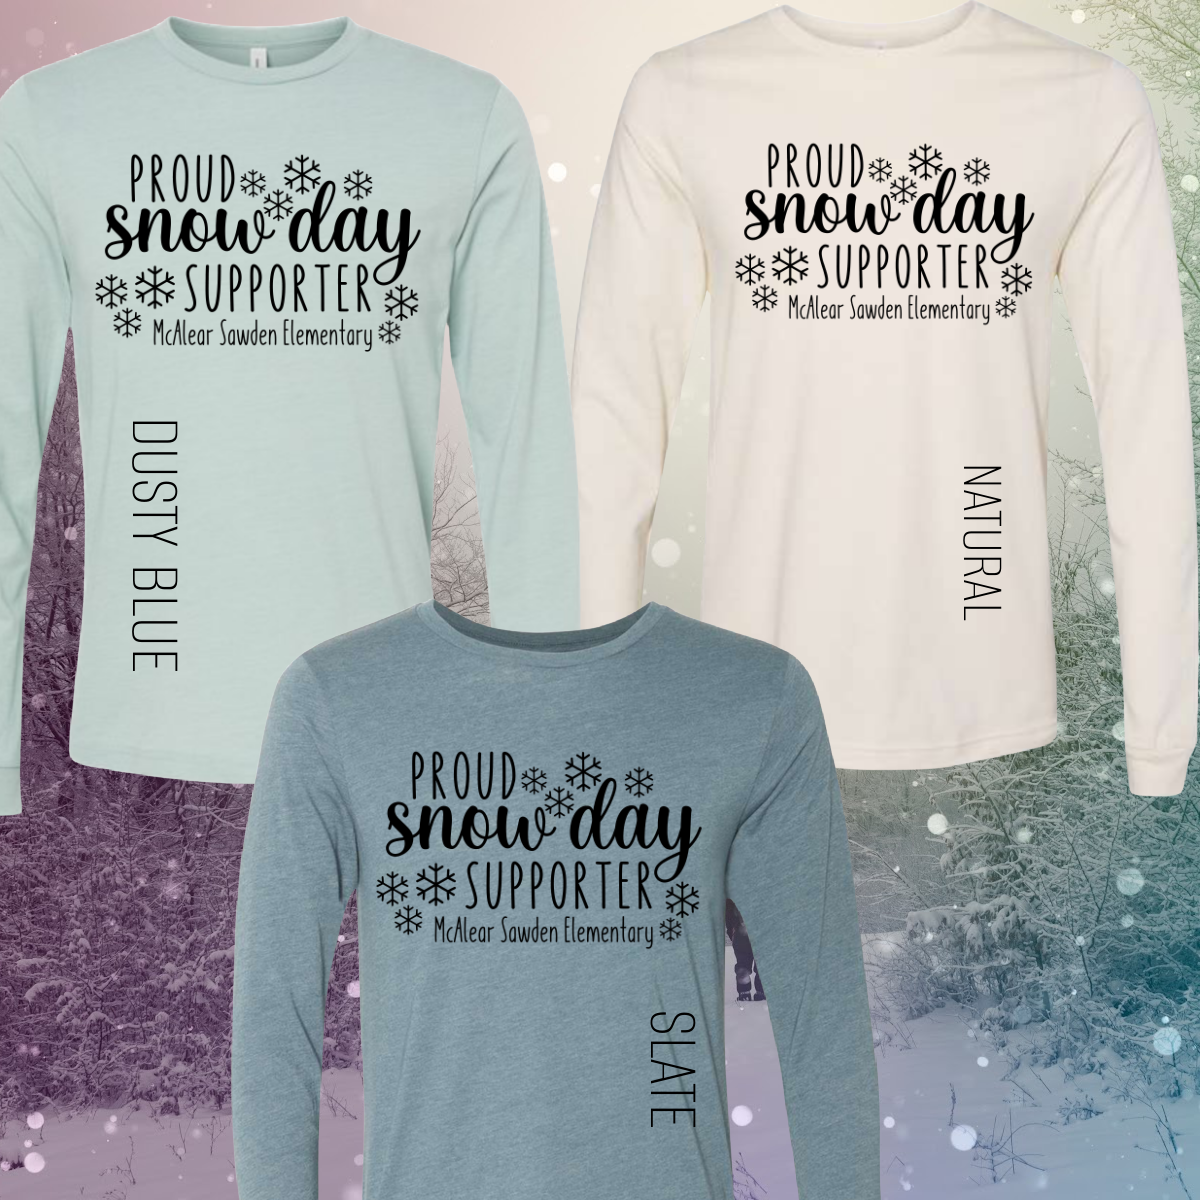 McAlear Proud Snow Day Supporter (McAlear Sawden Teacher Tees) - PREORDER ENDS 1/20